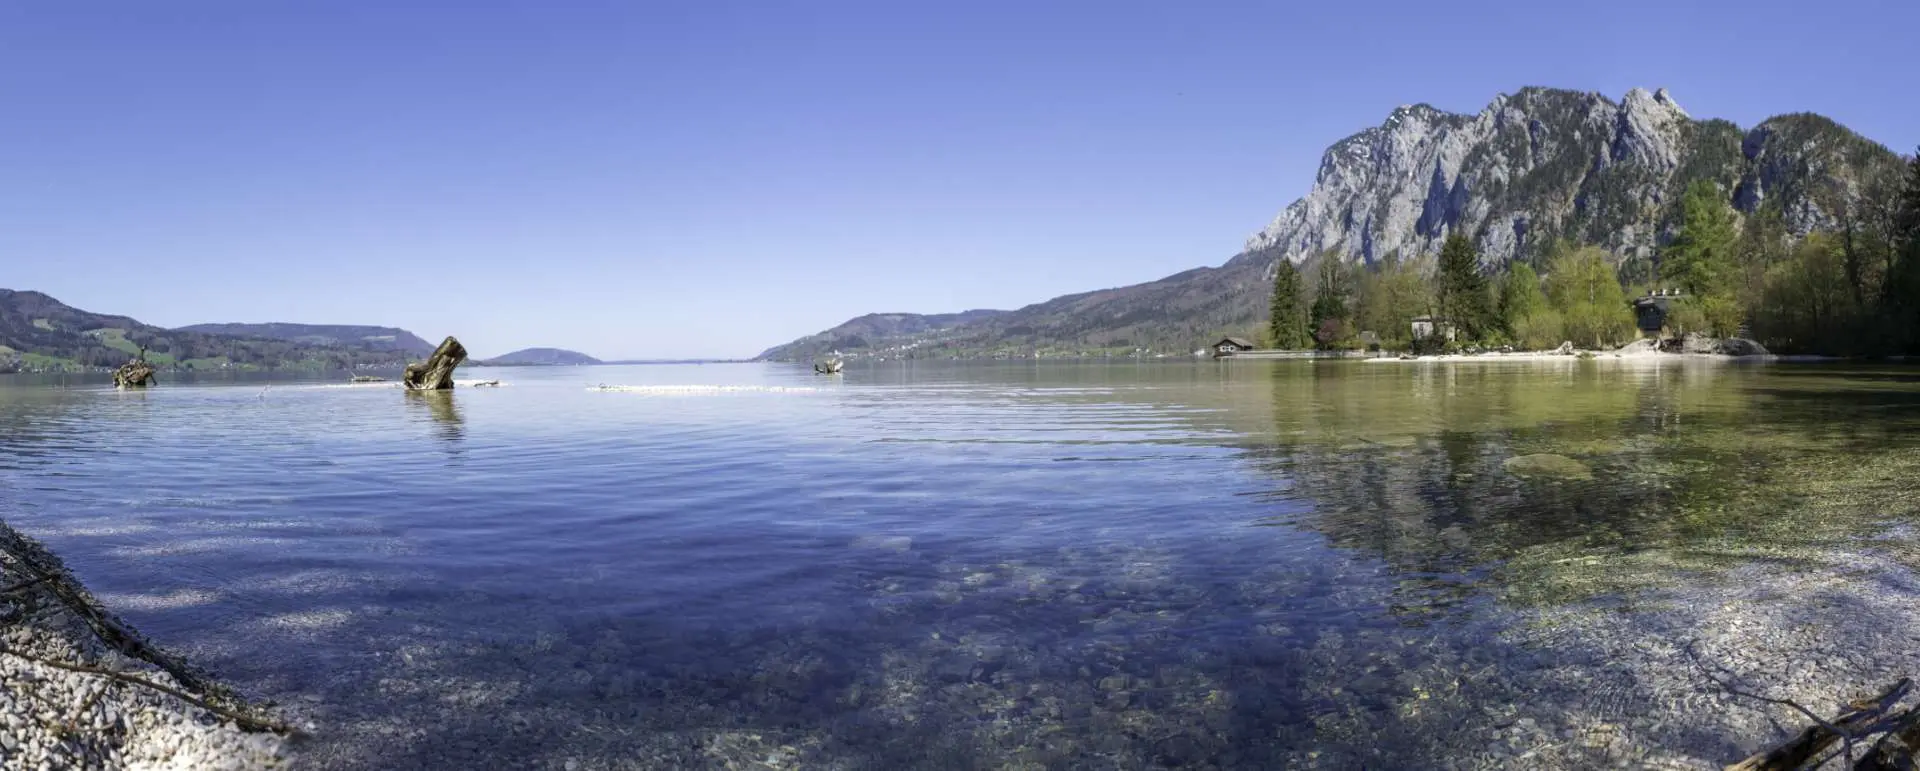 Attersee - the destination for groups